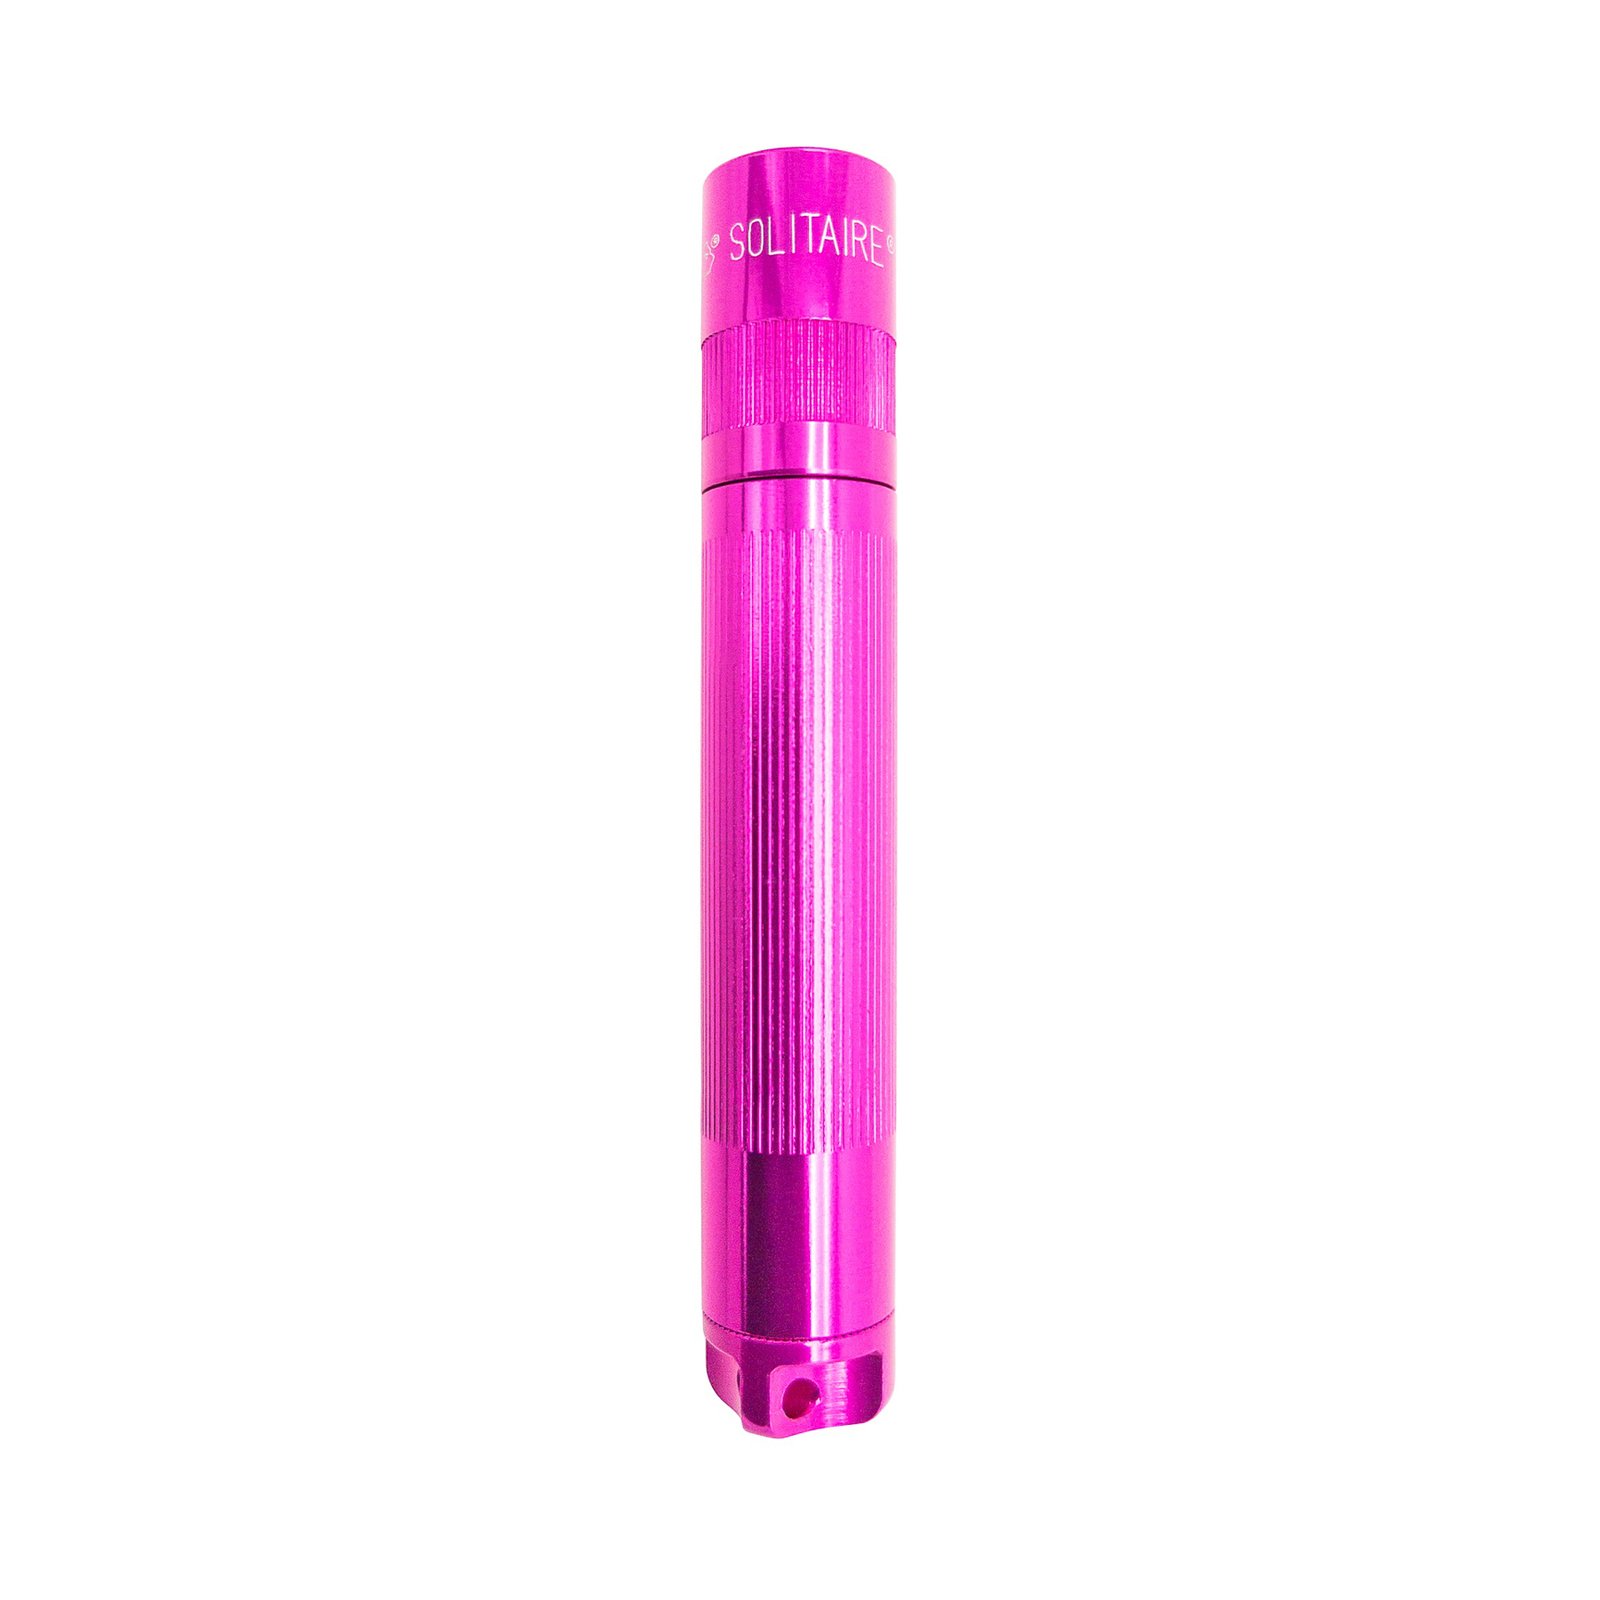 Maglite Xenon-Taschenlampe Solitaire 1-Cell AAA, Box, pink